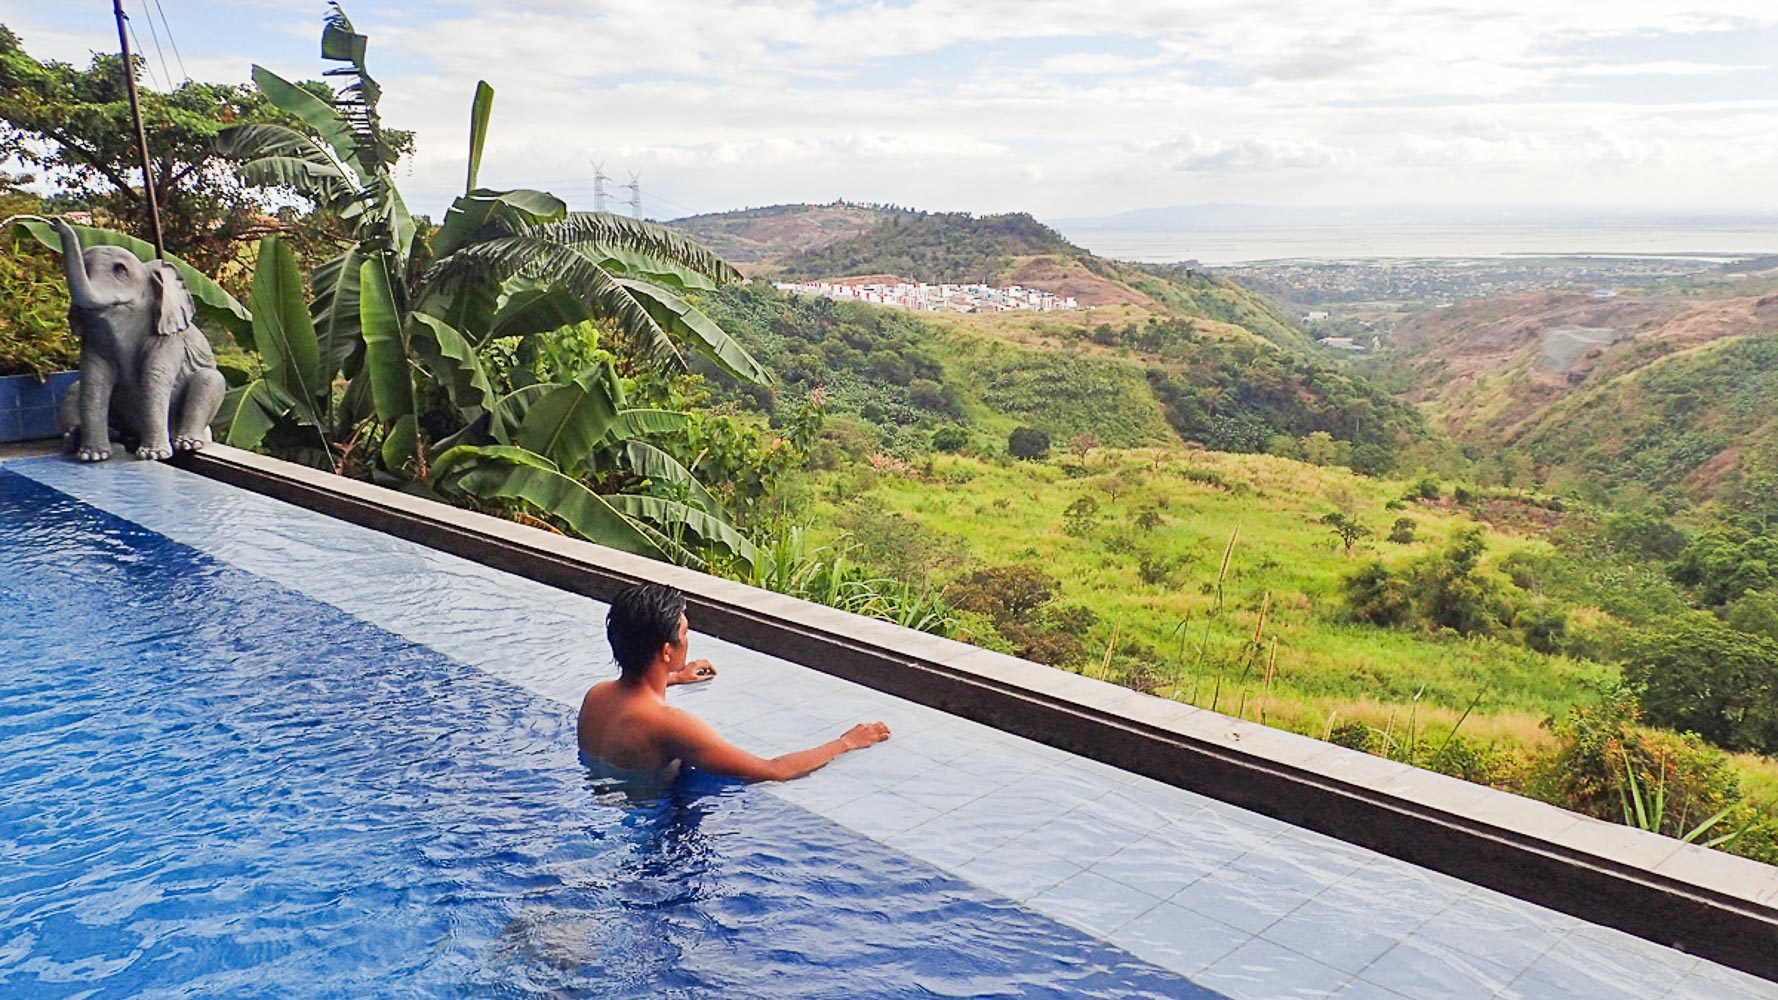 POOLSIDE. Gorgeous views at Luljetta's infinity pool. Photo by Rhea Claire Madarang  